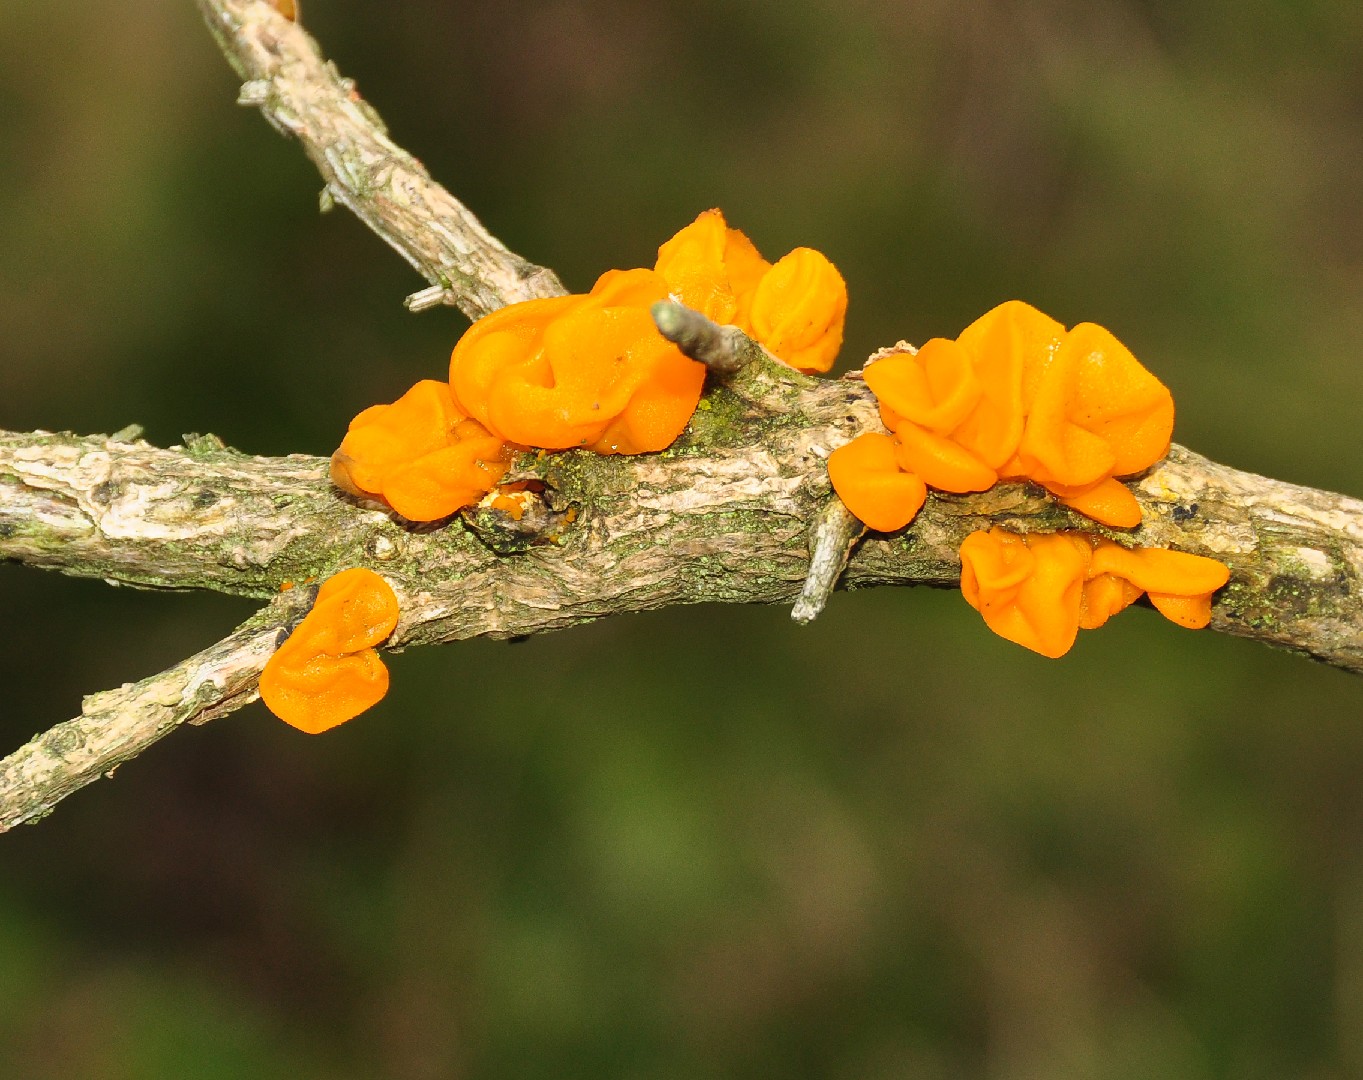 Witches' butter (Tremella mesenterica)